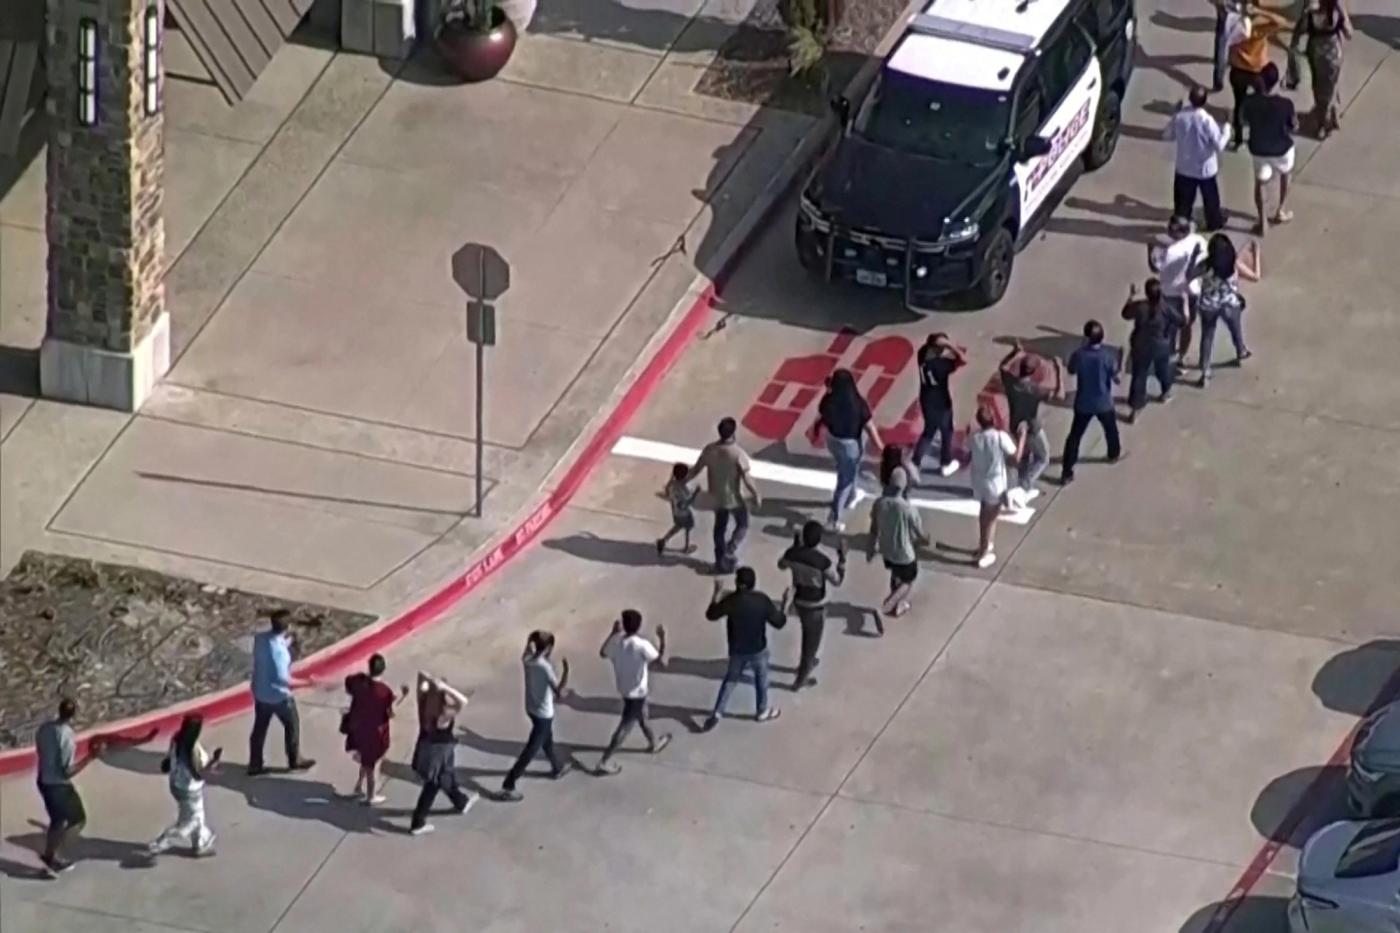 Shoppers leave with hands up as law enforcement responds to a shooting in the Dallas area's Allen Premium Outlets, which authorities said has left multiple people injured in Allen, Texas